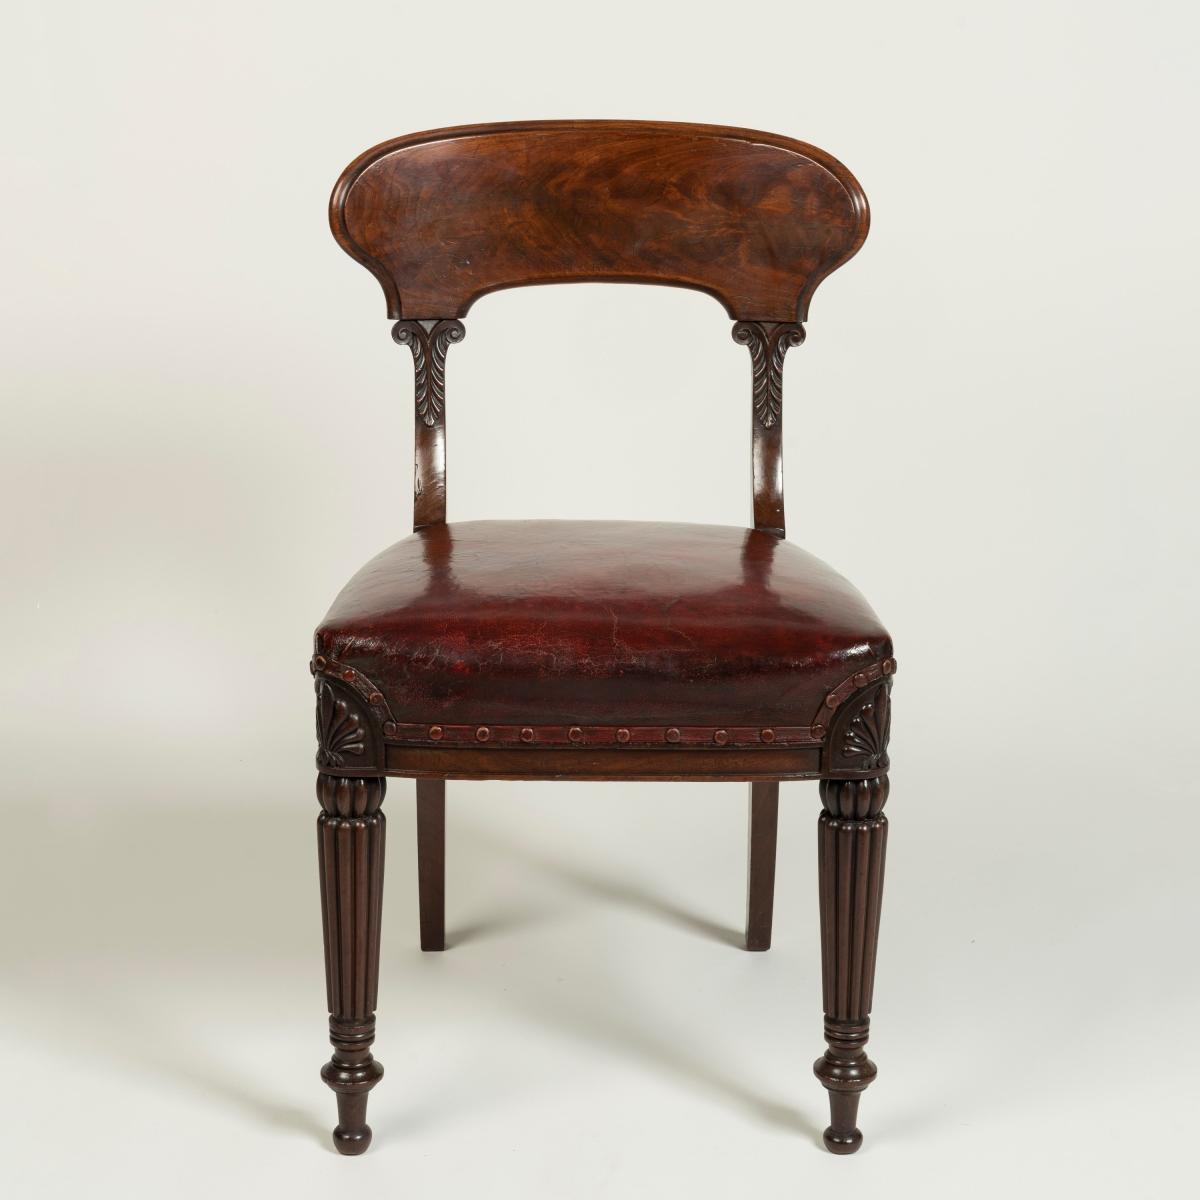 A Fine set of Twelve George IV Dining Chairs Attributed to Gillows